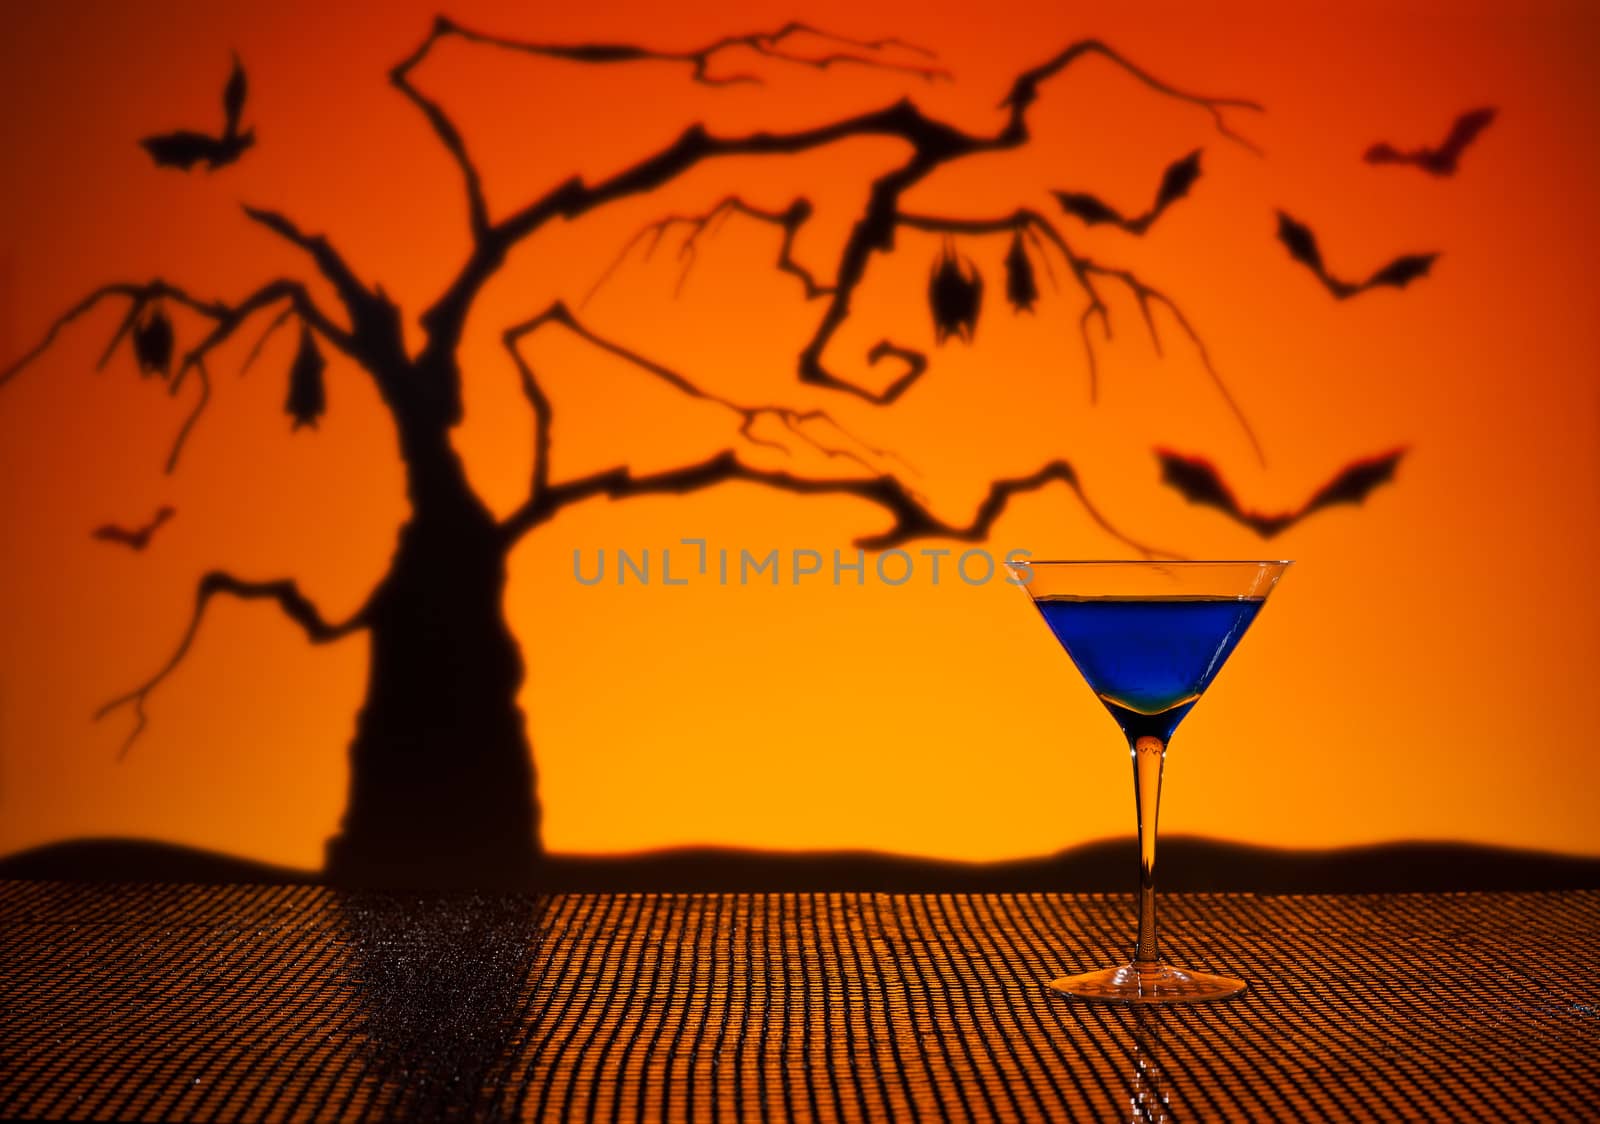 Cobalt Martini in Halloween setting with bats and a tree